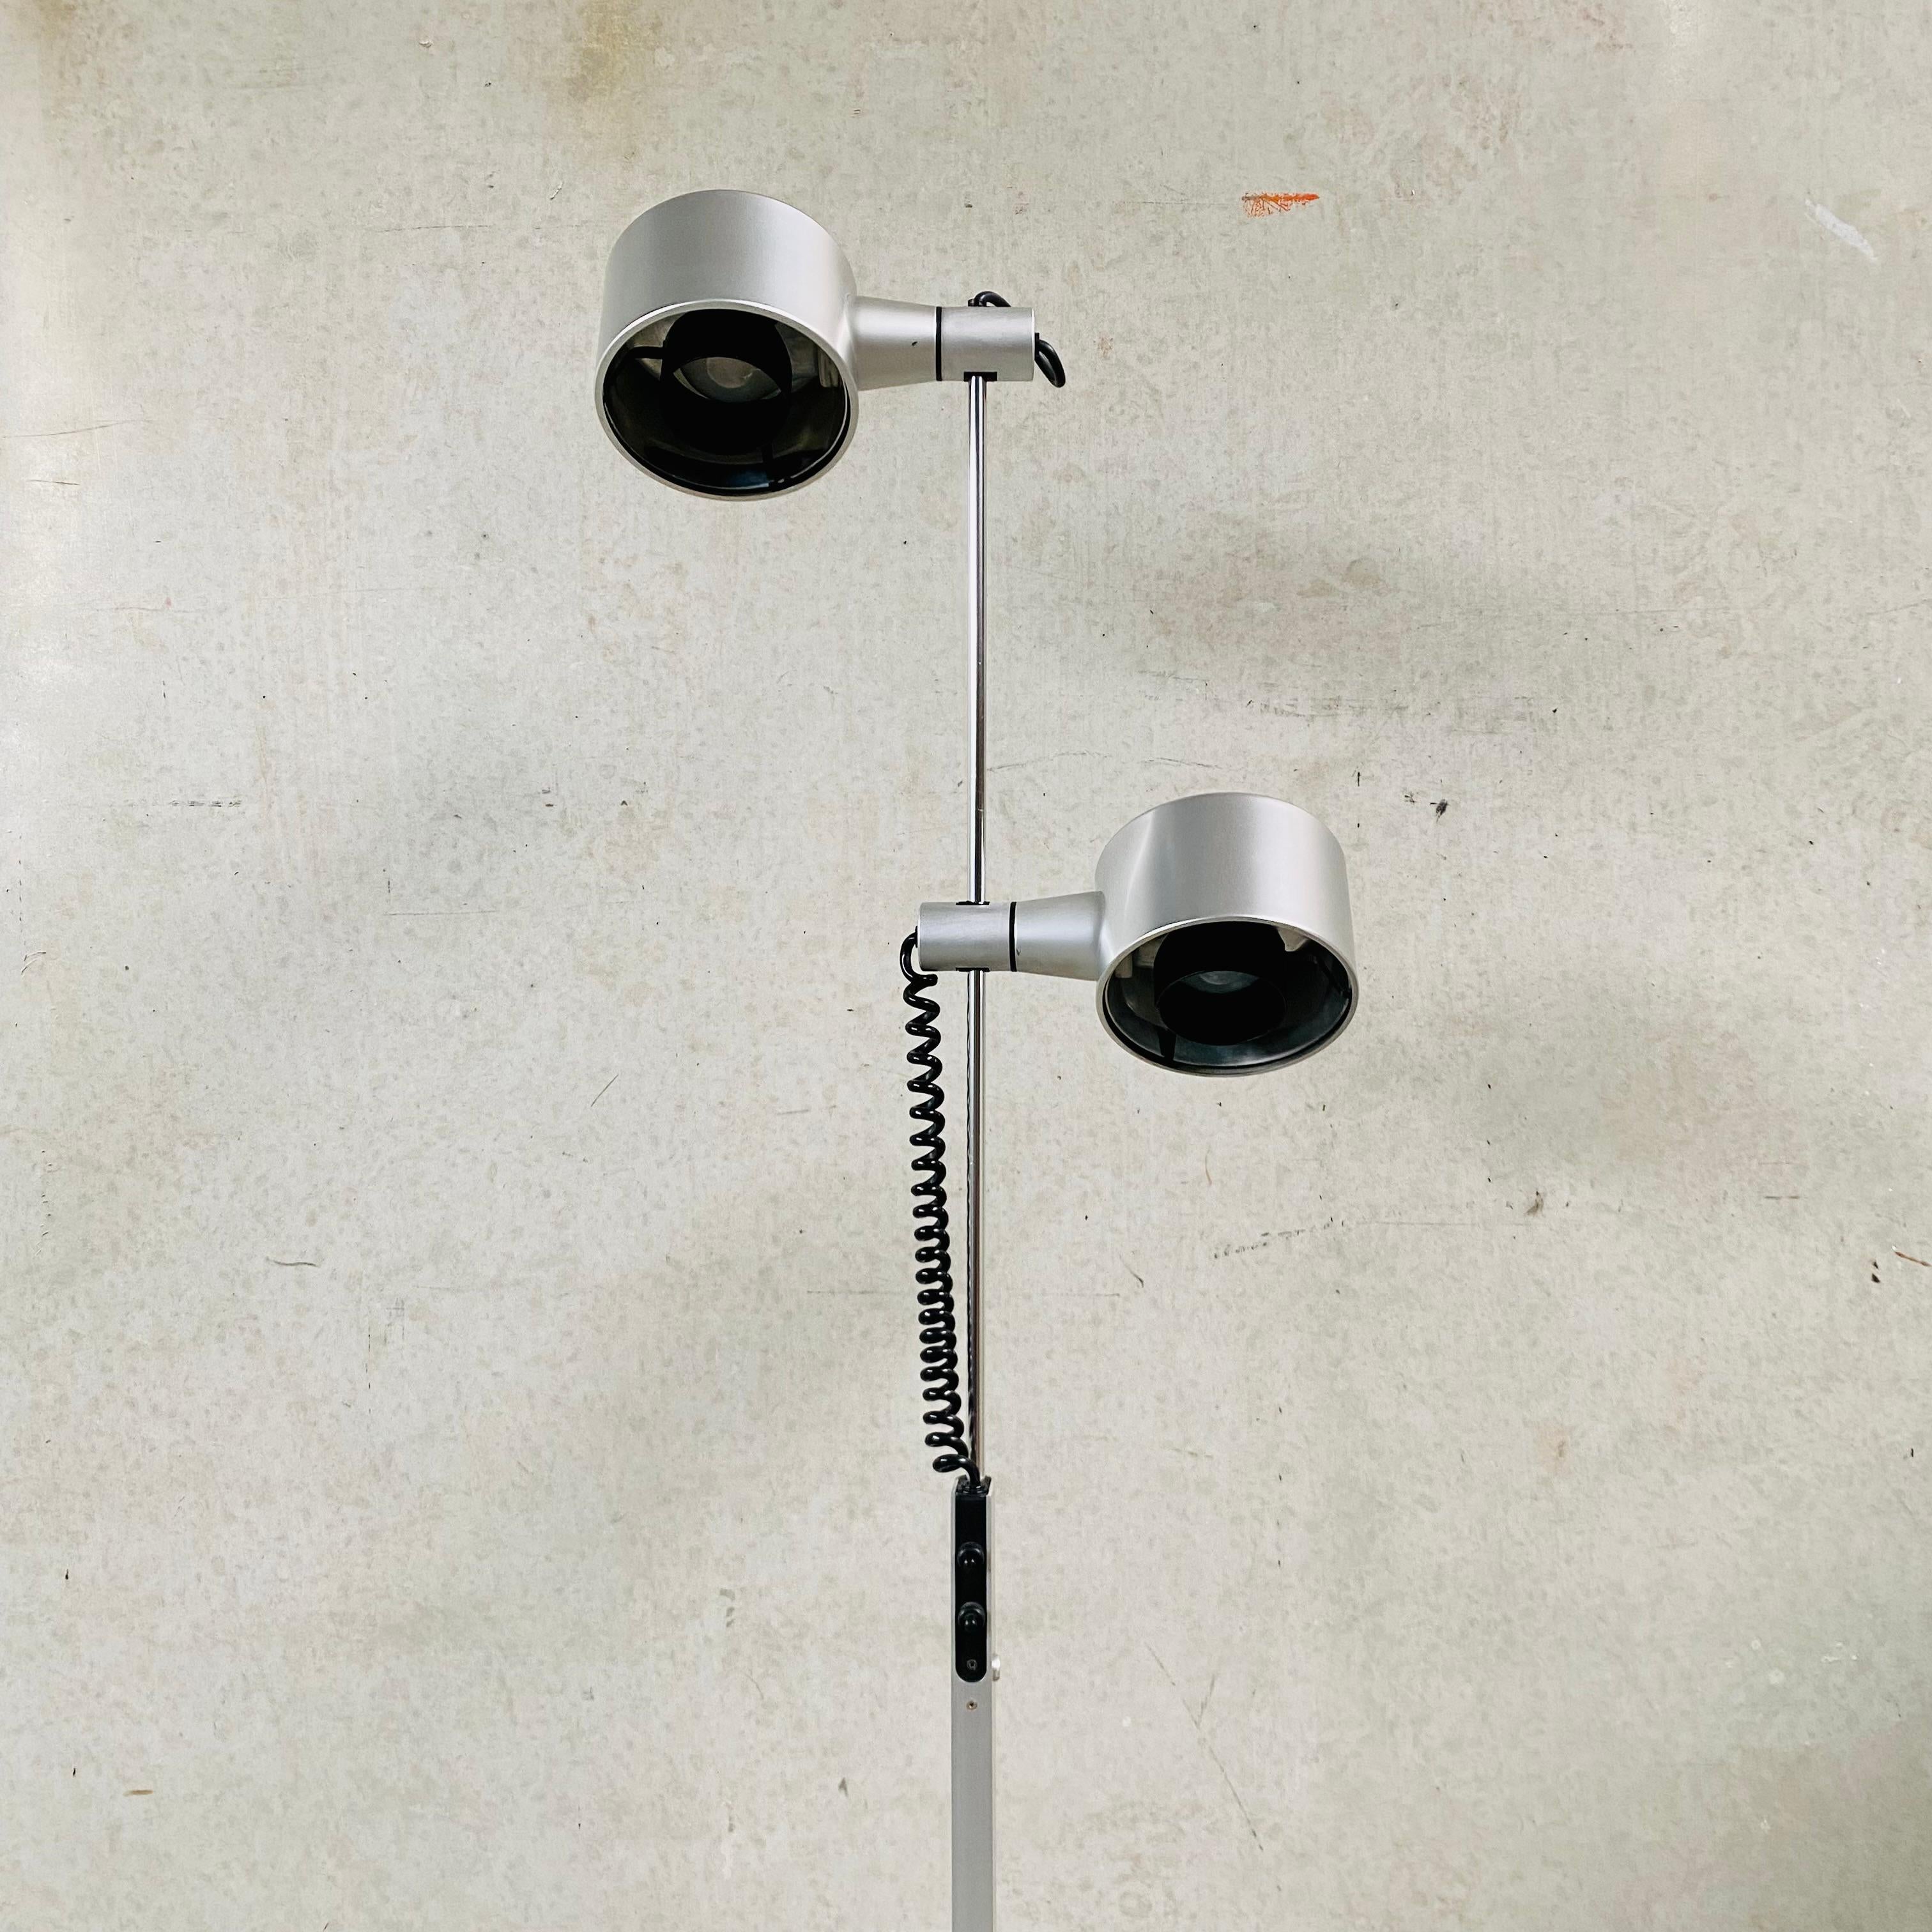 QC Twin Spotlicht Floor Lamp by Ronald Homes for Conelicht Limited, UK, 1970s For Sale 5